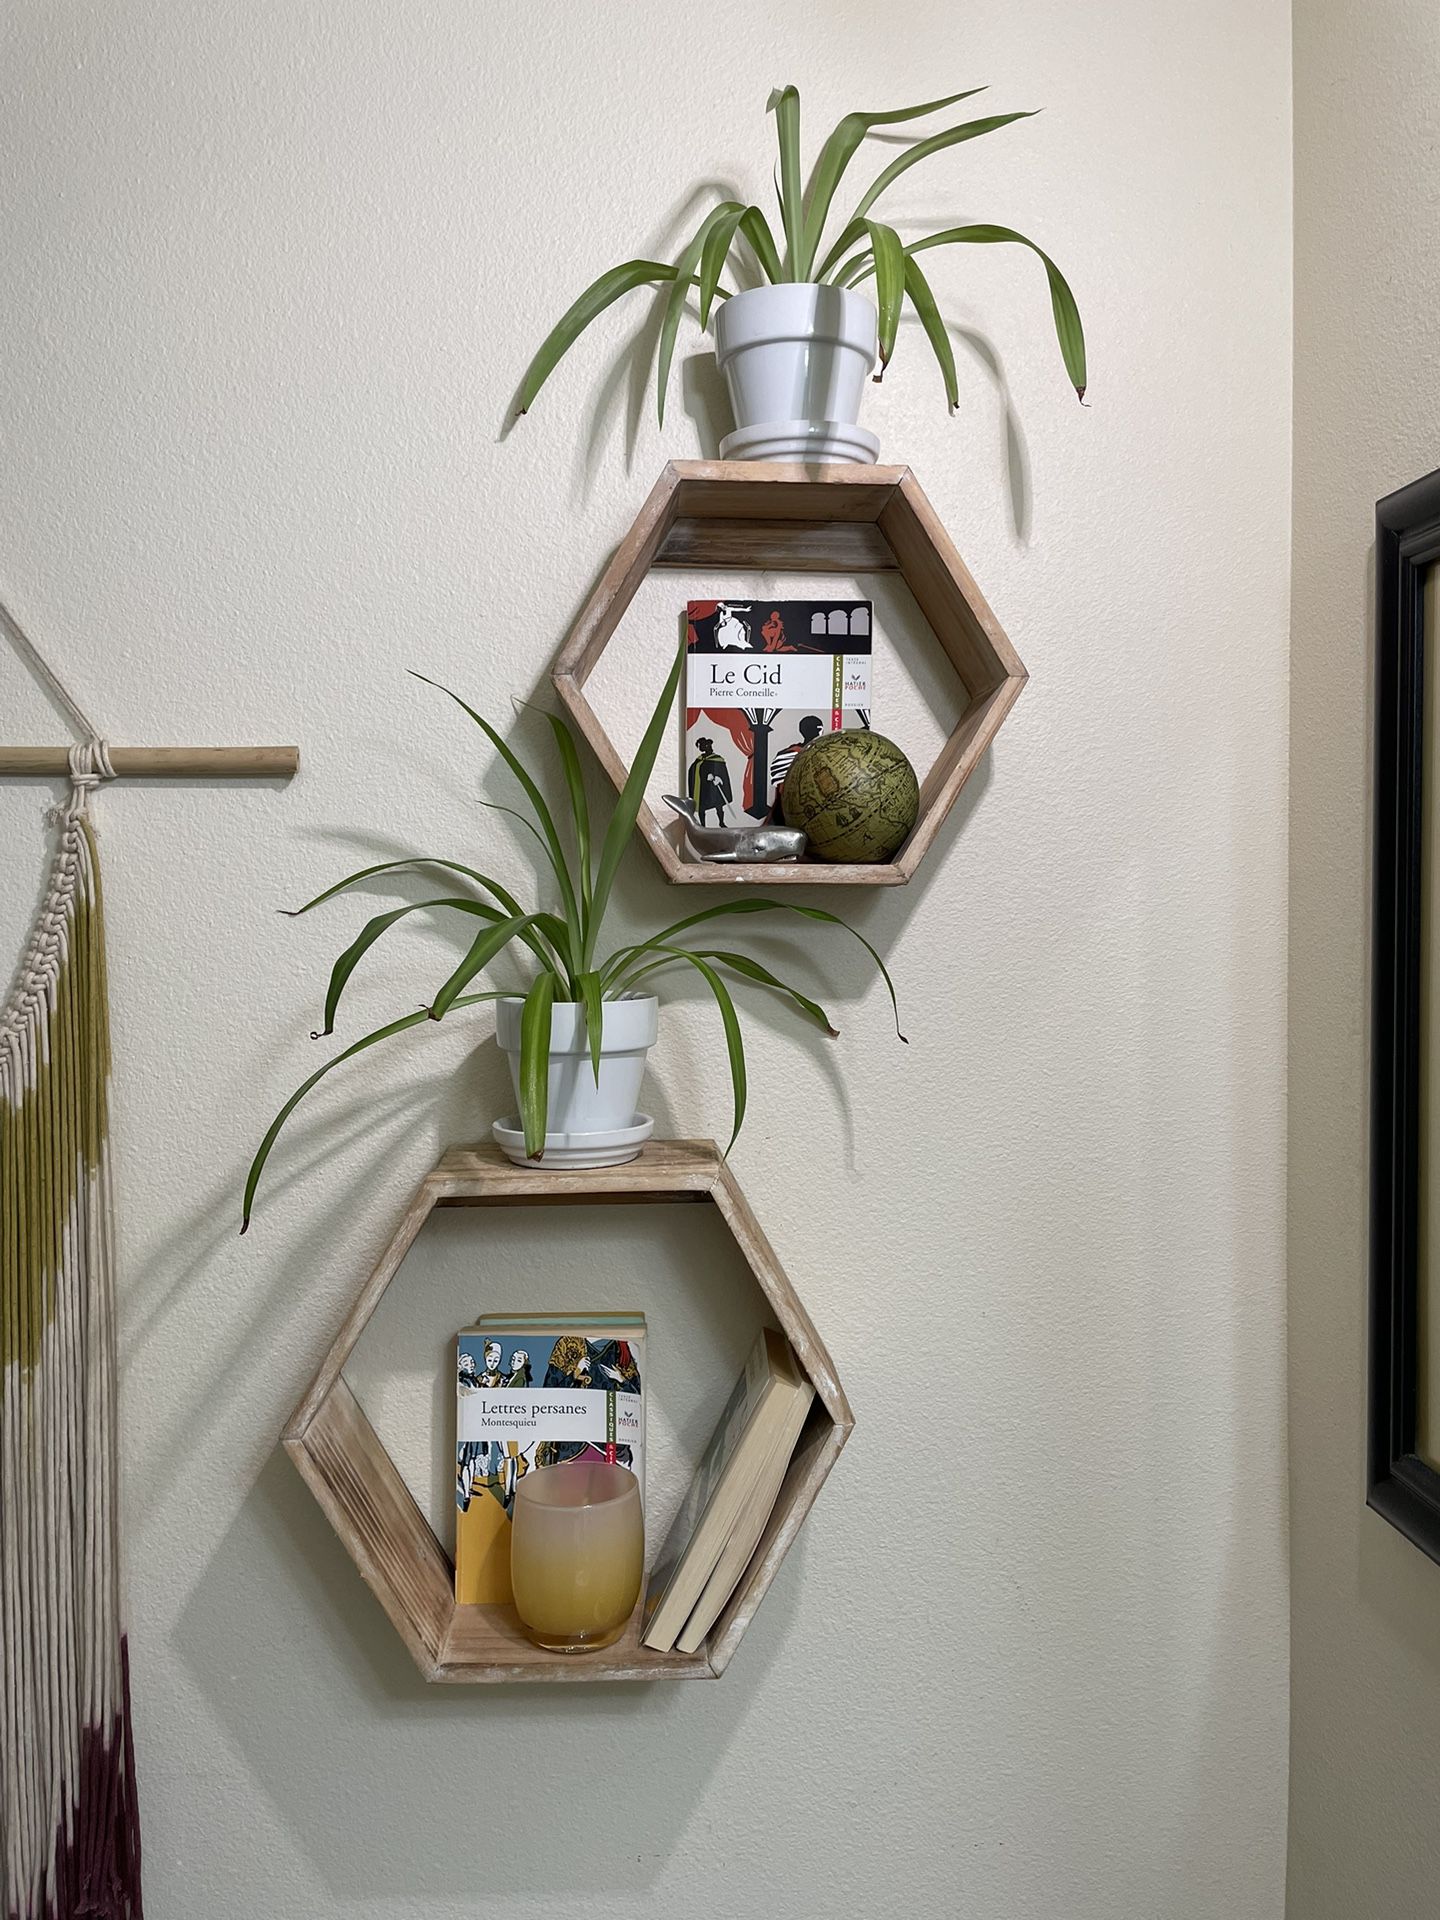 Wooden Hexagon Wall Shelves With Spider Plants 